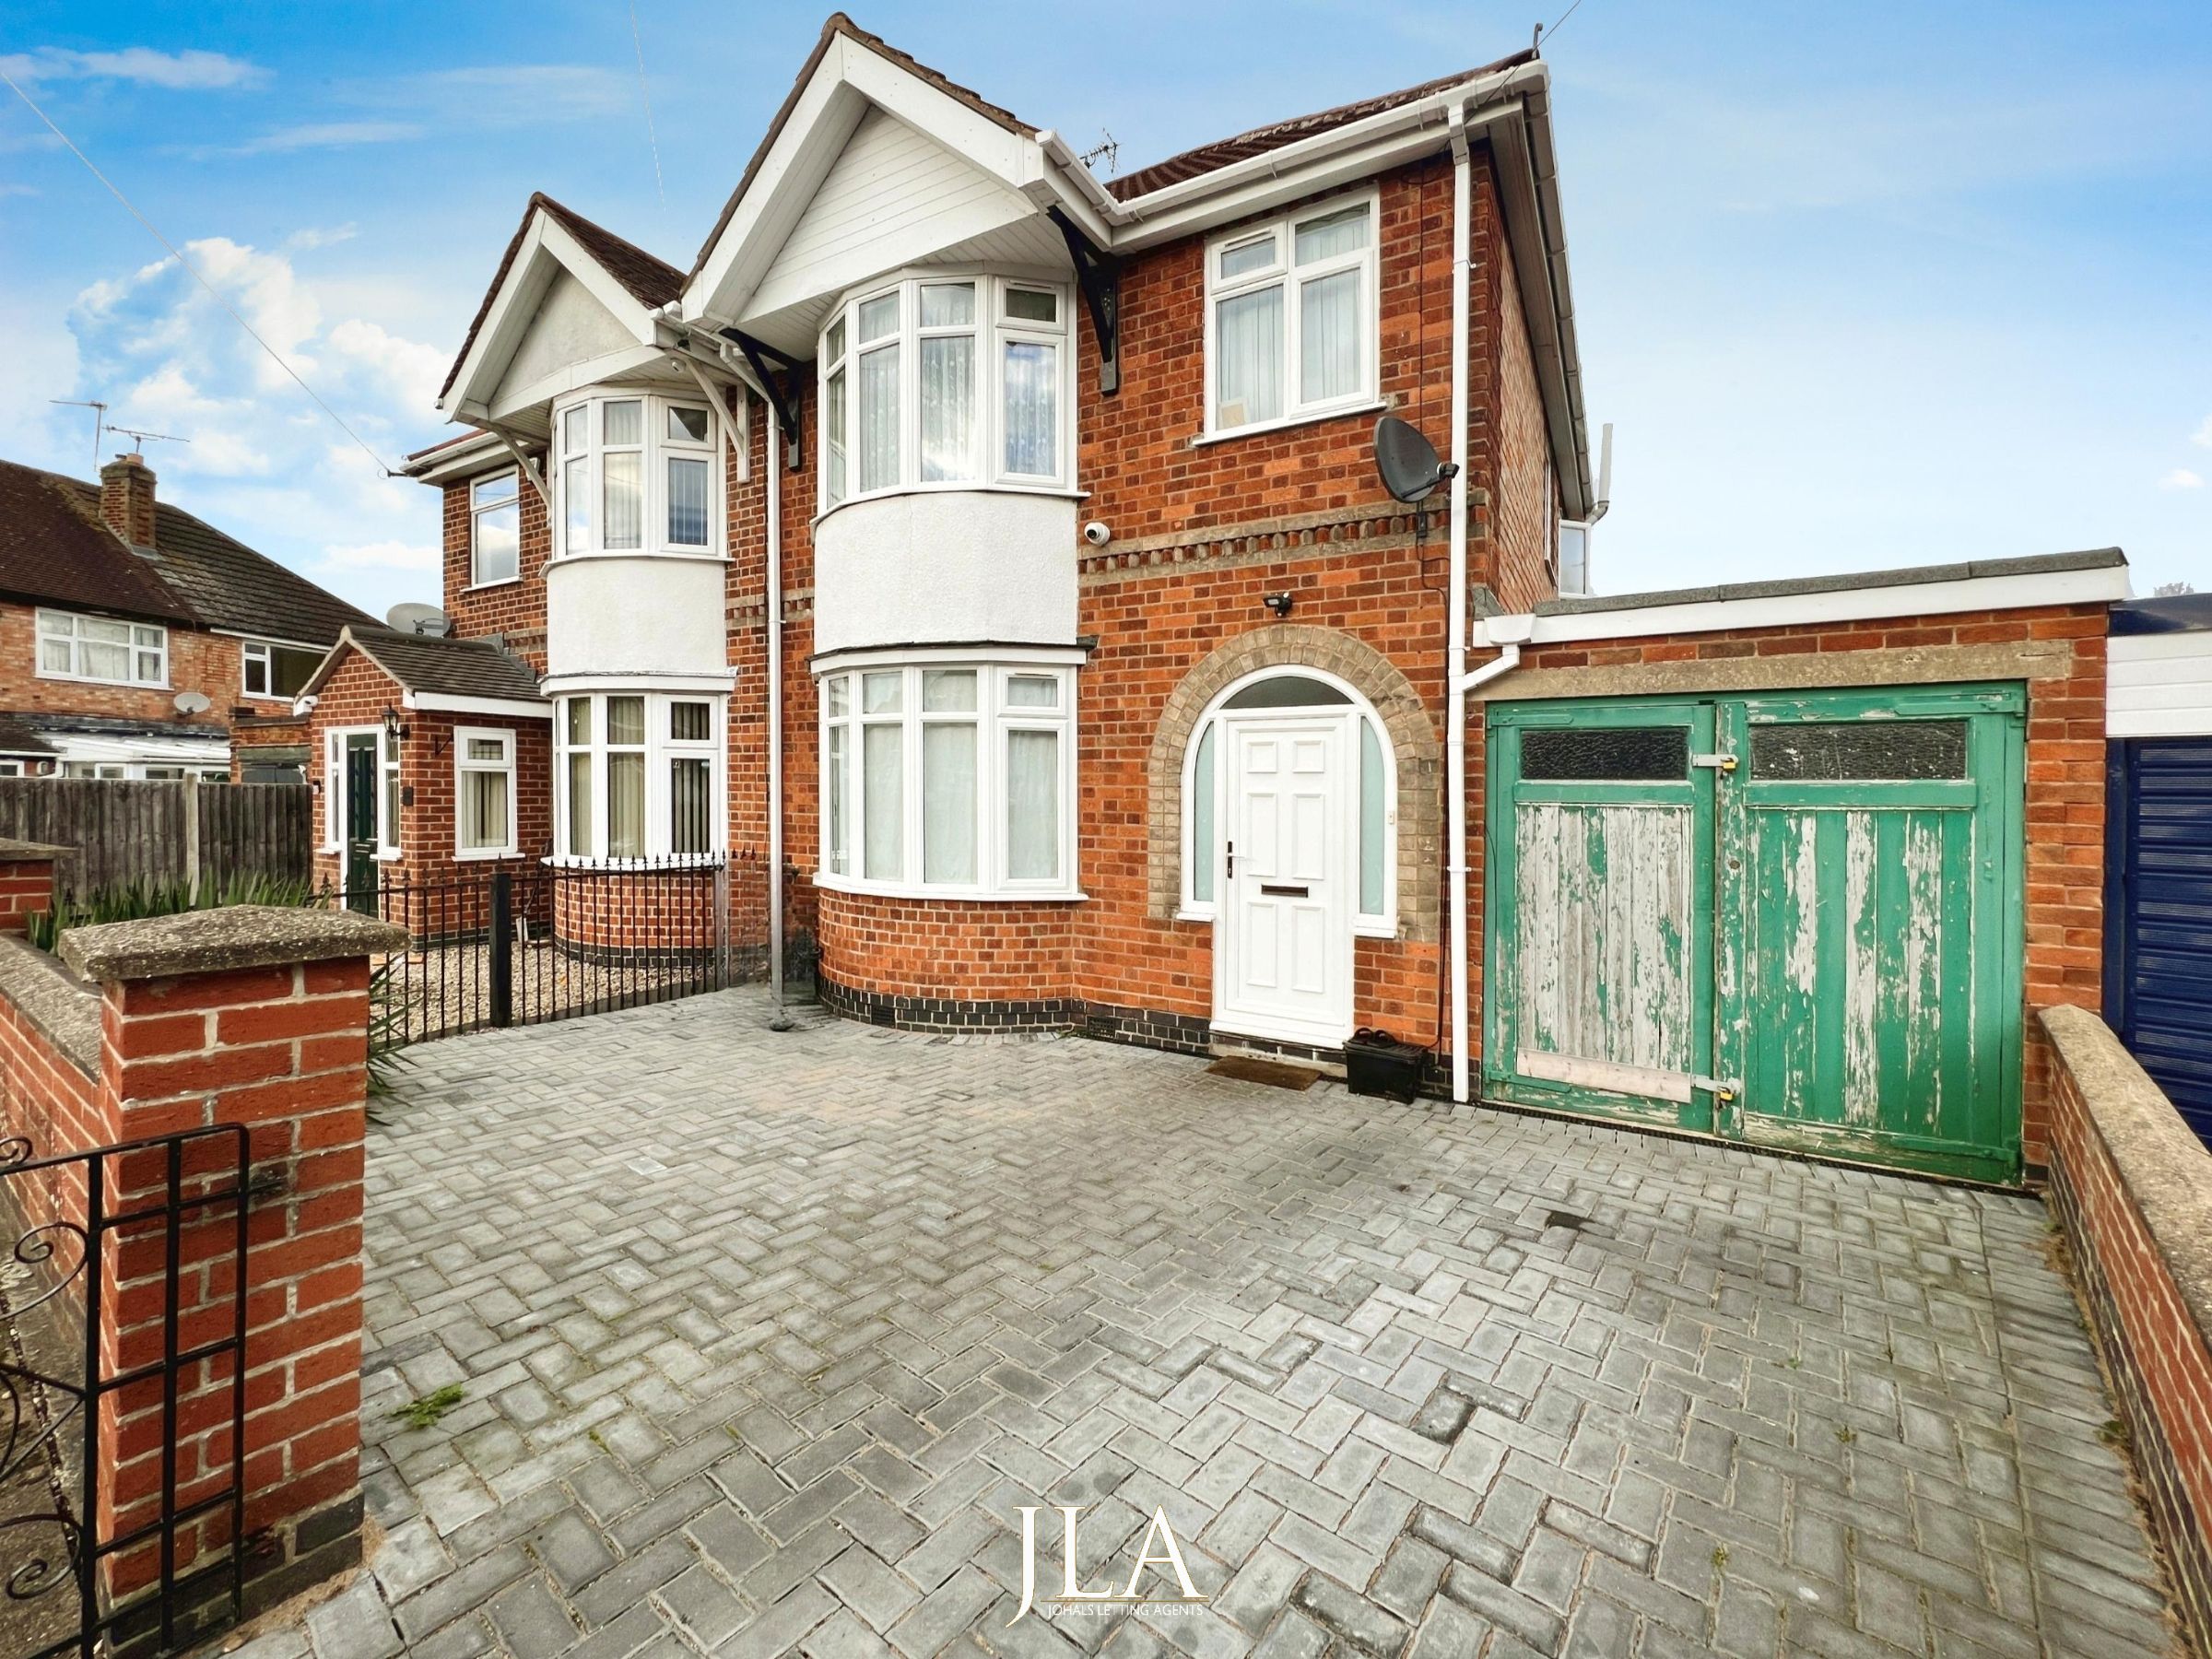 3 bed semi-detached house to rent in Lynholme Road, Leicester, LE2 